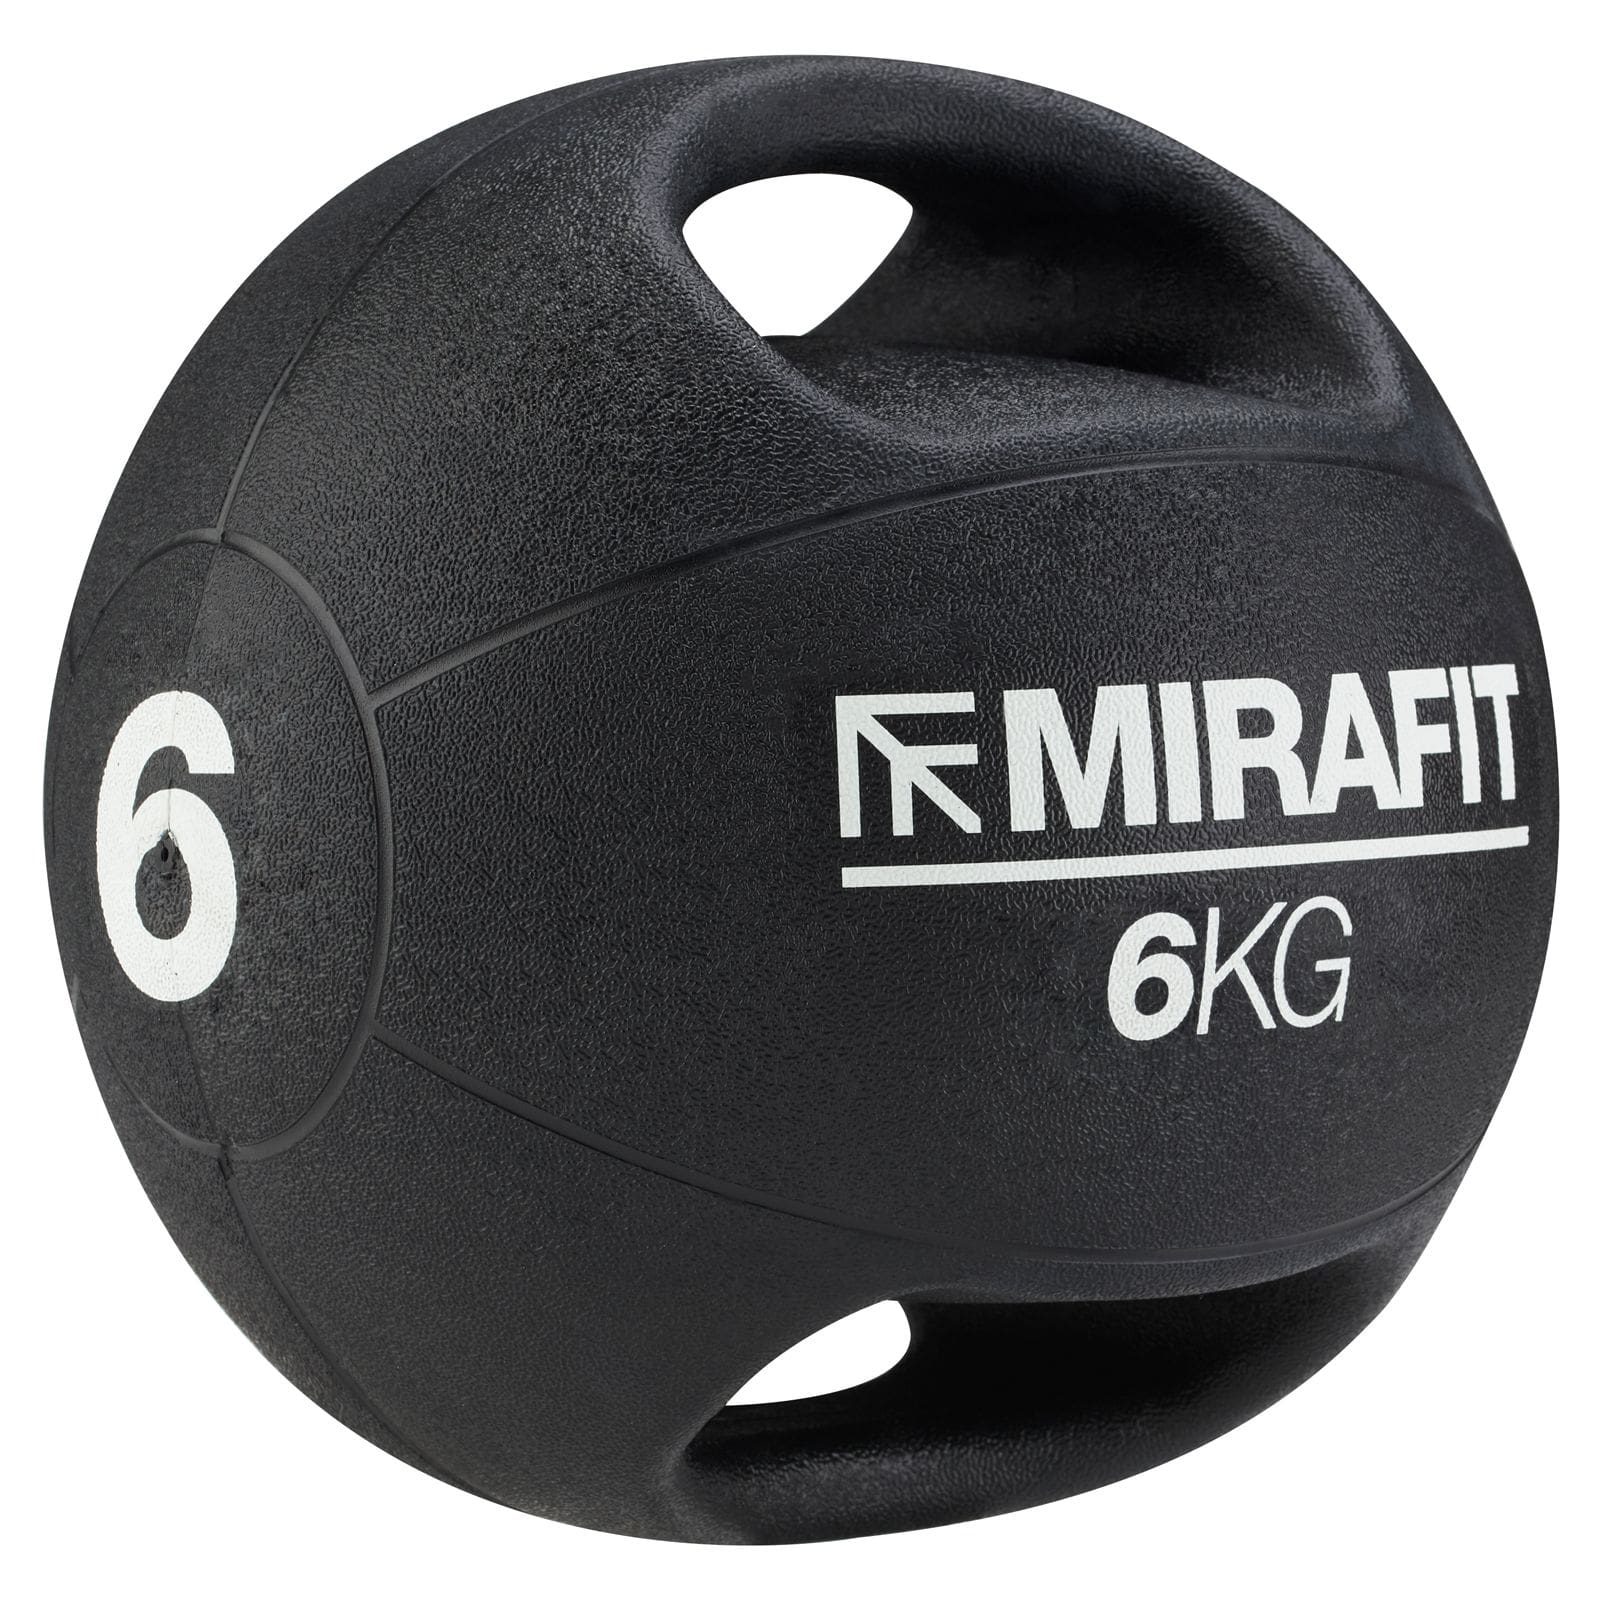 Weights of the Mirafit medicine ball with handles 6kg UK Review